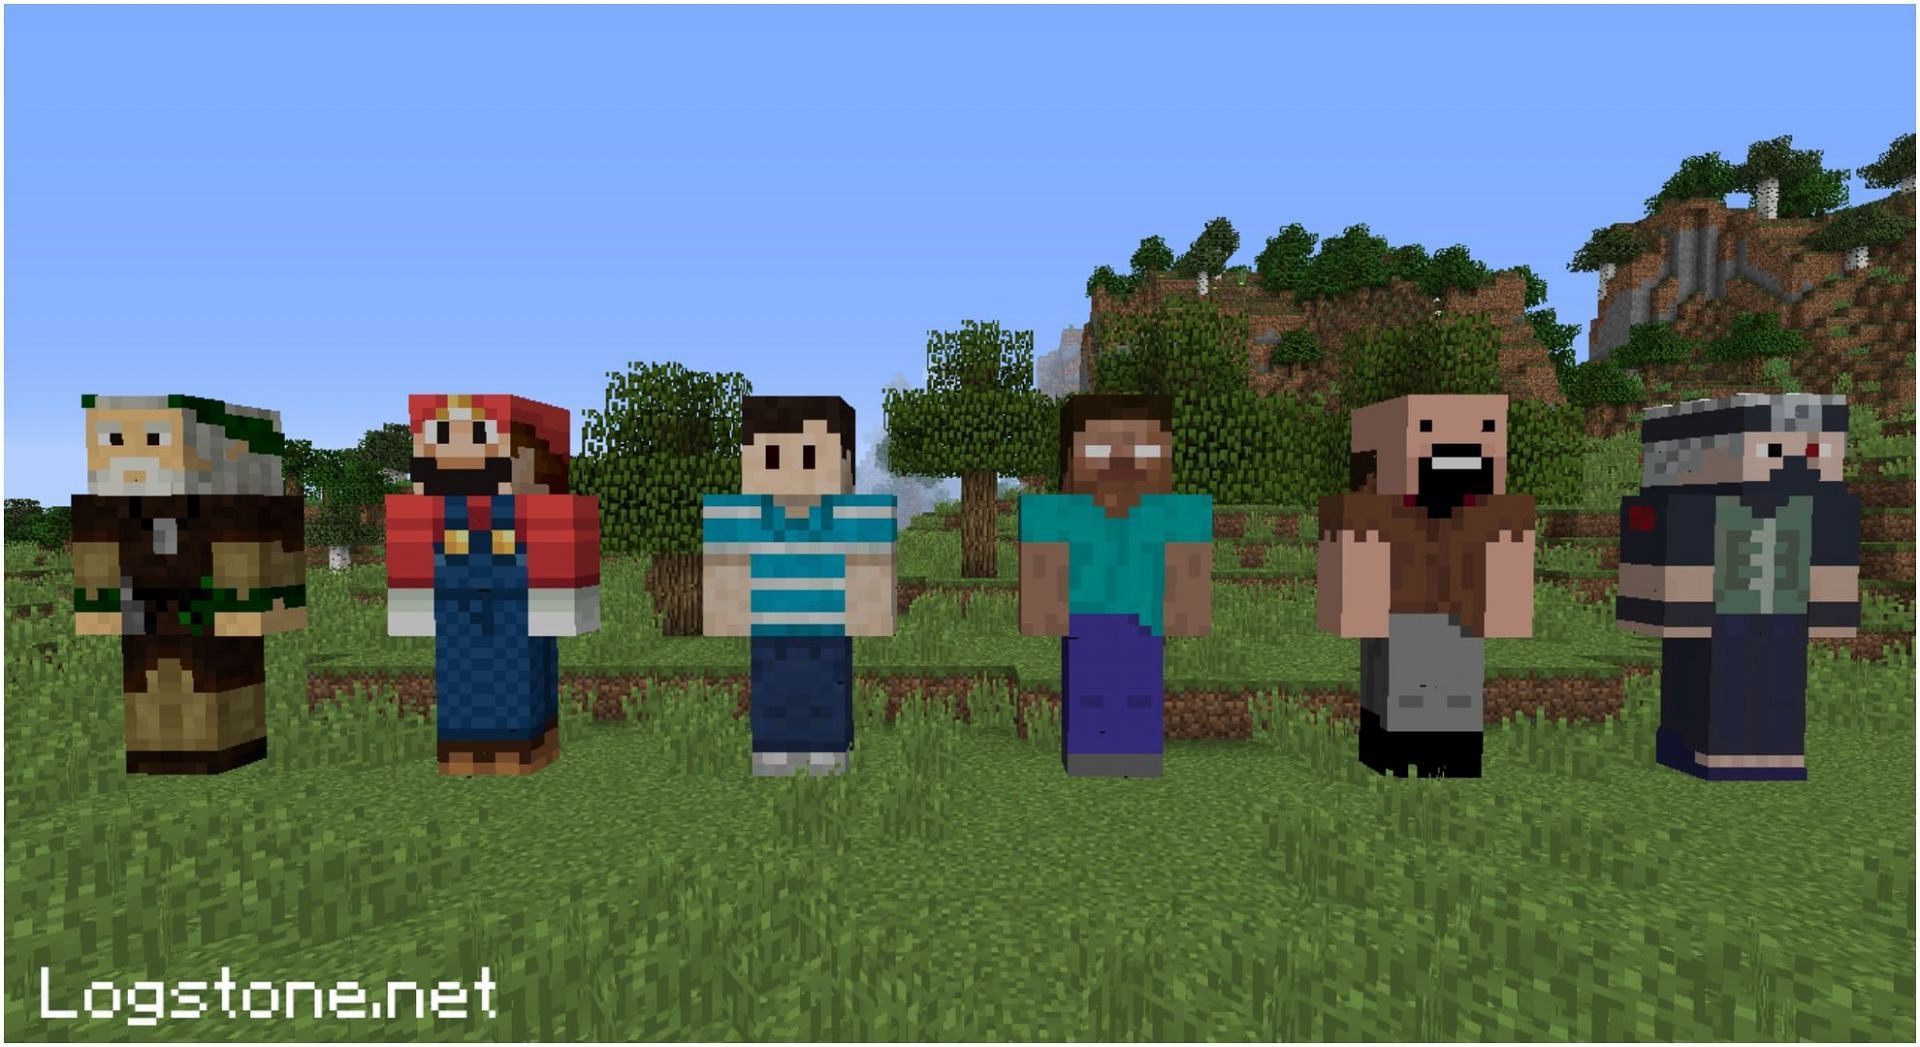 Minecraft has a ton of different skins (Image via Logstone.net)